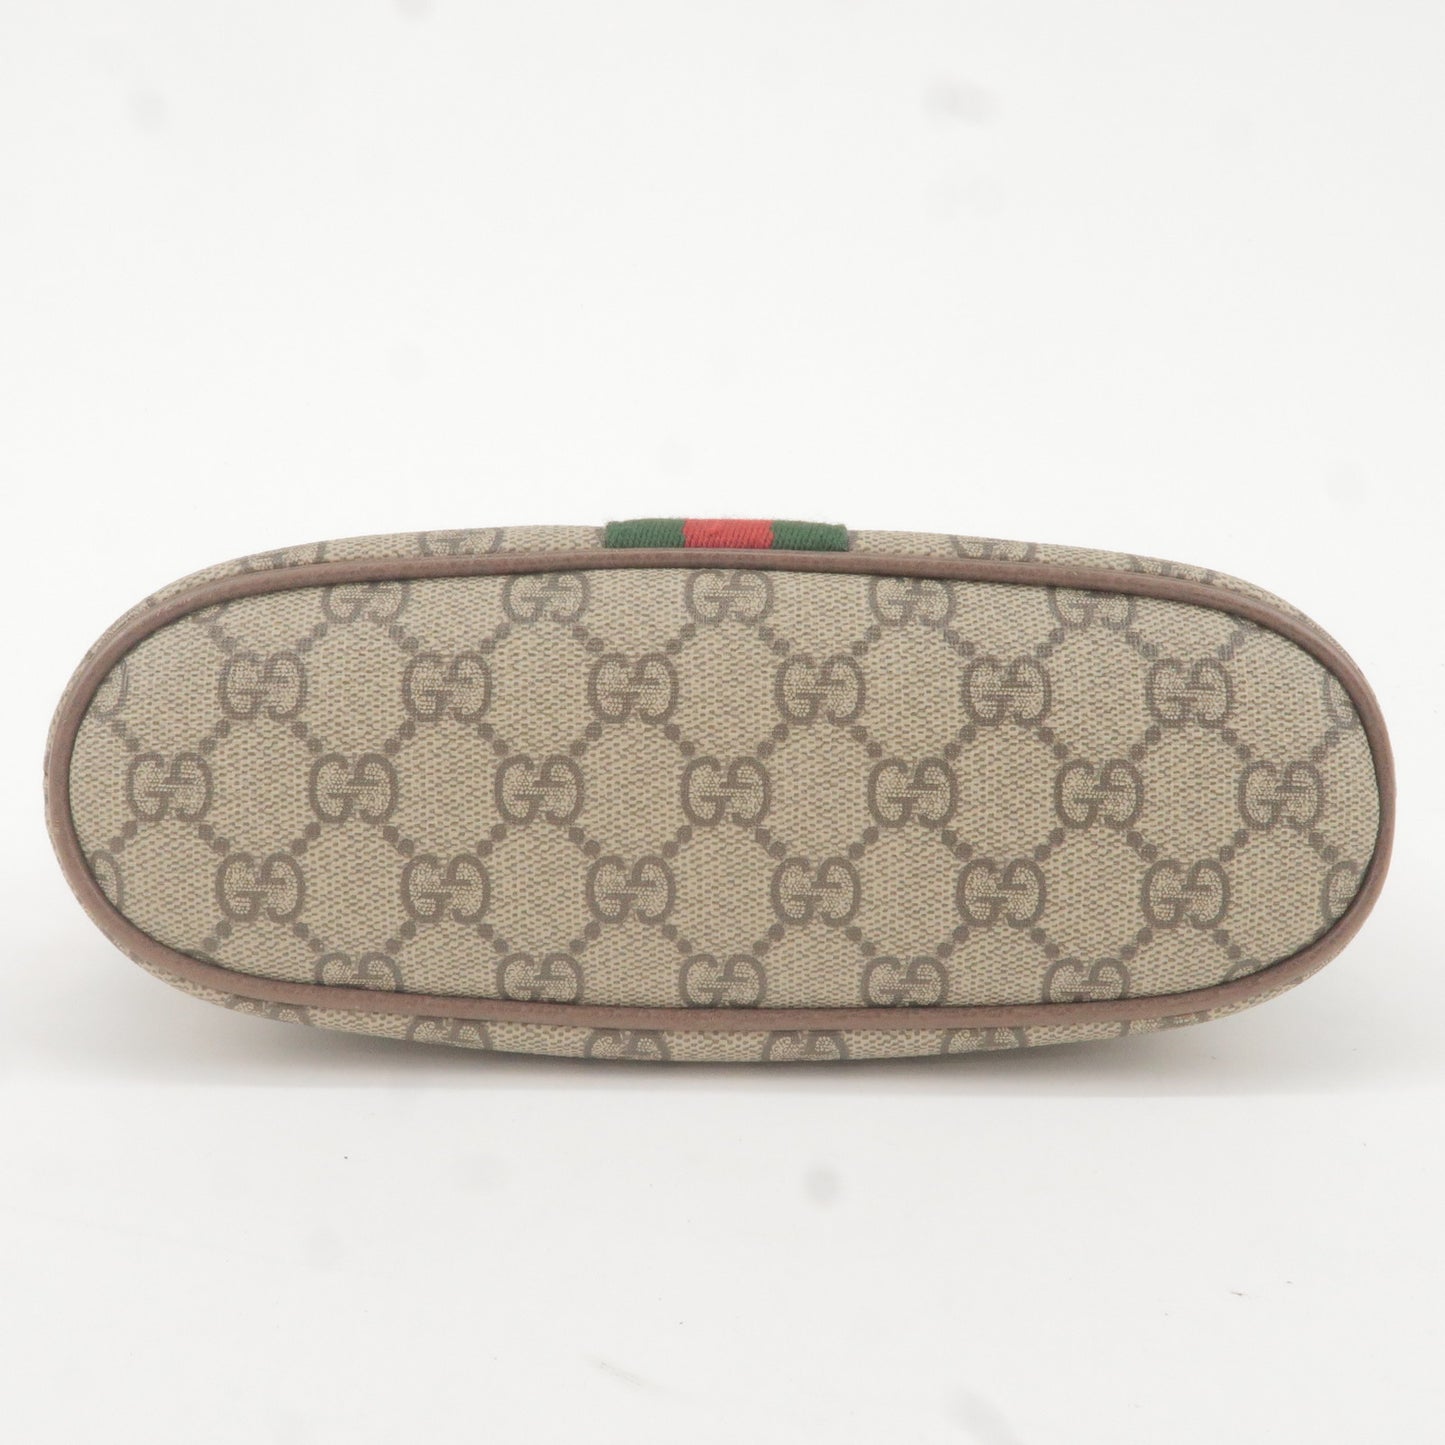 GUCCI Ophidia Sherry GG Supreme Leather Cosmetic Pouch 625551